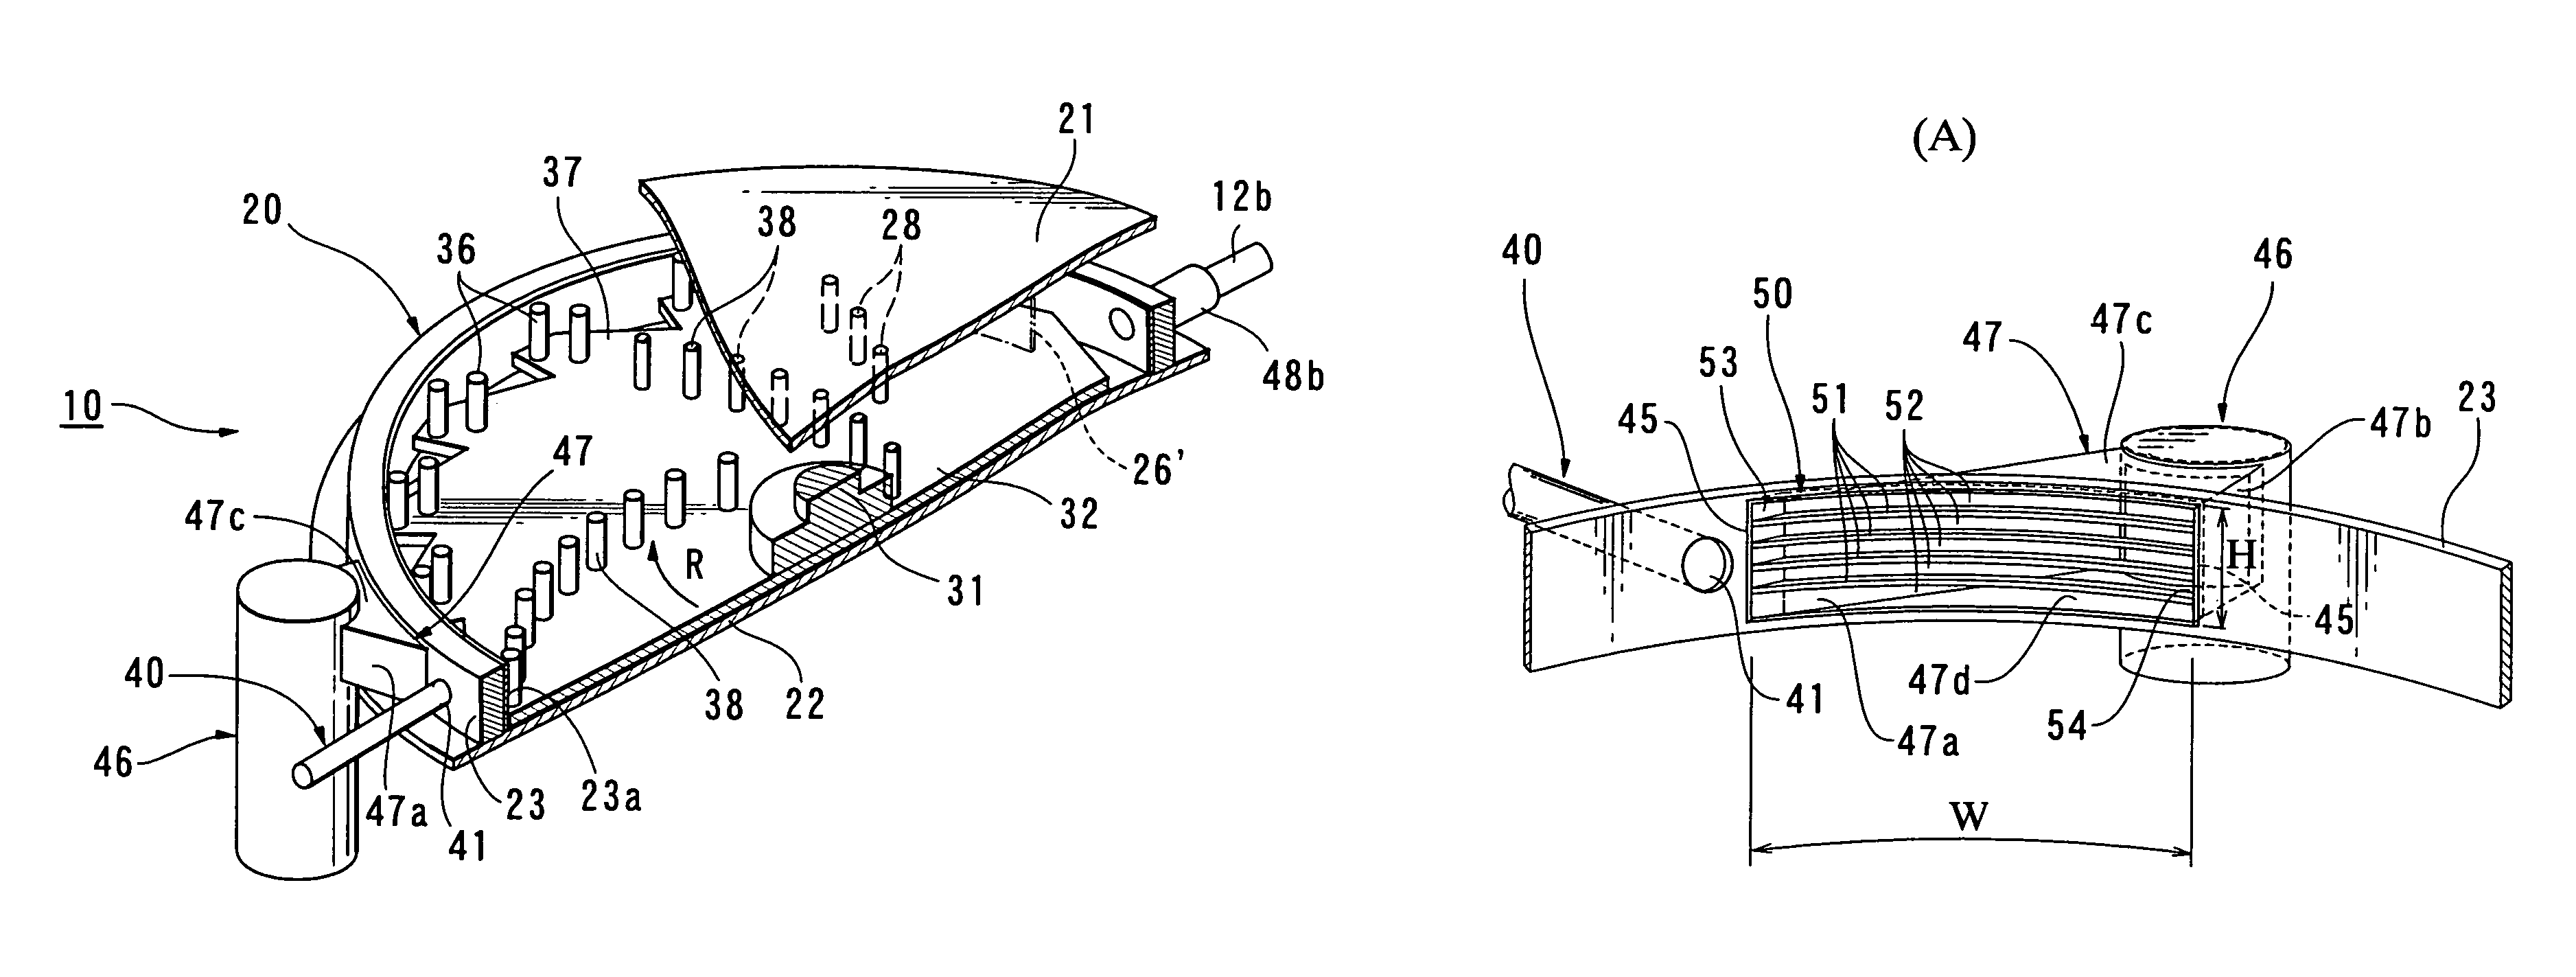 Mixer and mixing method for producing gypsum slurry